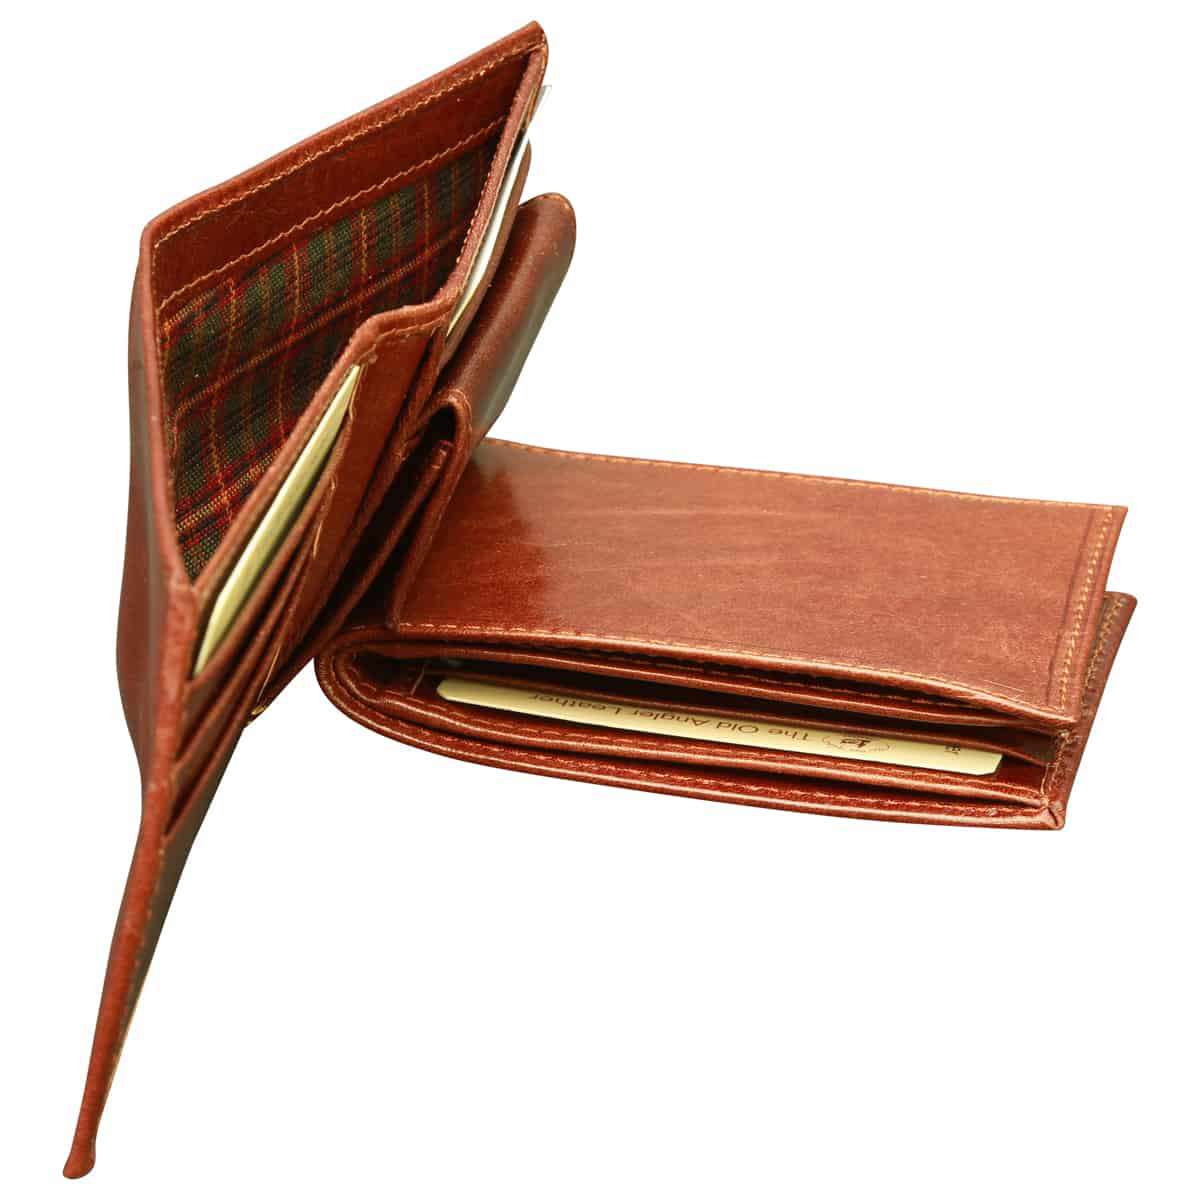 Leather wallet for men - Brown | 802505MA | EURO | Old Angler Firenze